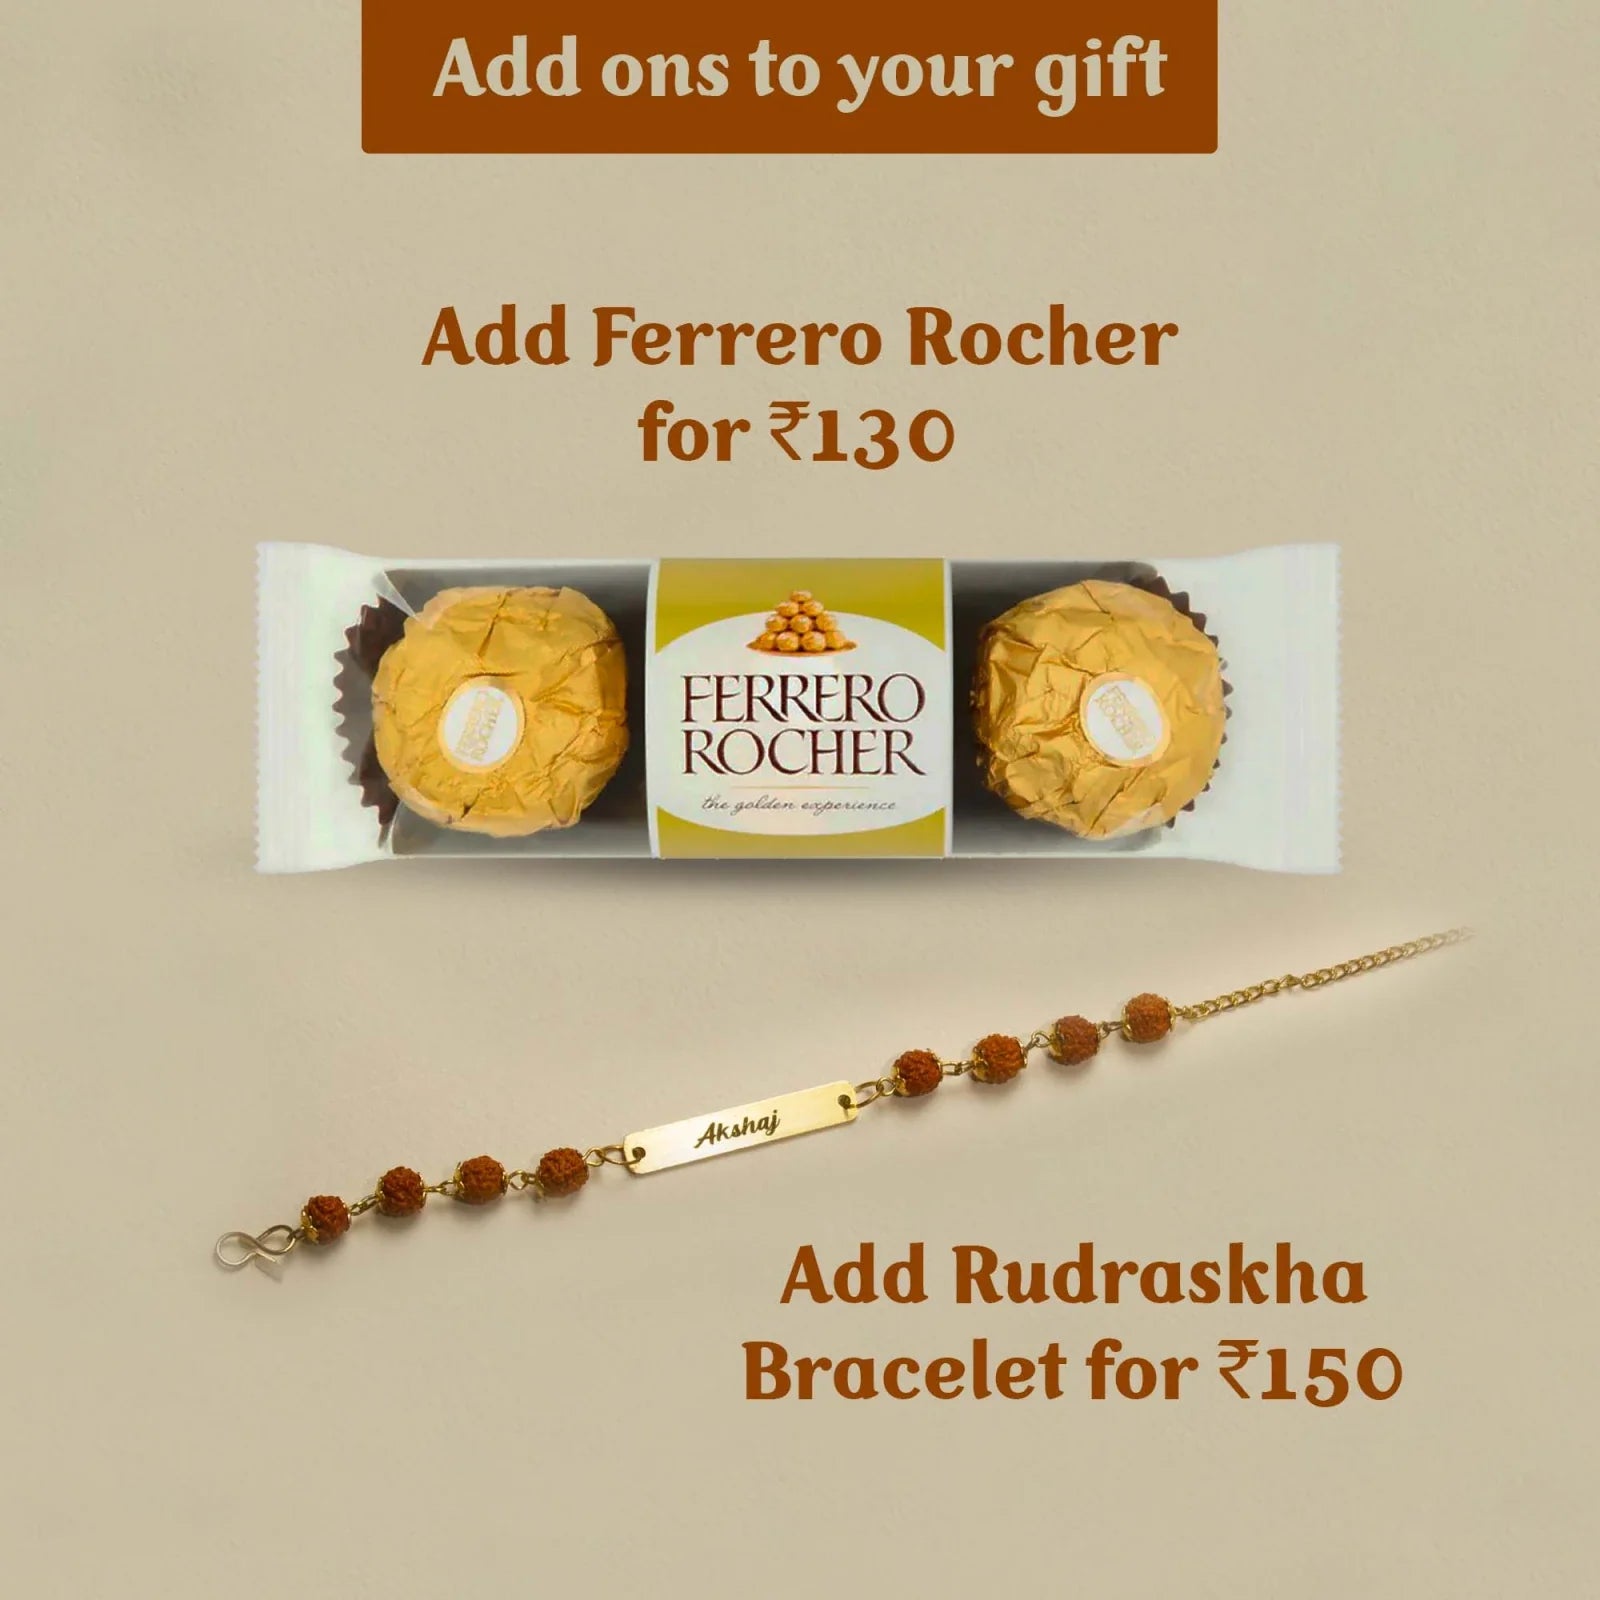 Add a customized rudraksha bracelet for your brothers and make every occasion sweeter and fuller with these rich chocolaty ferraro rocher.